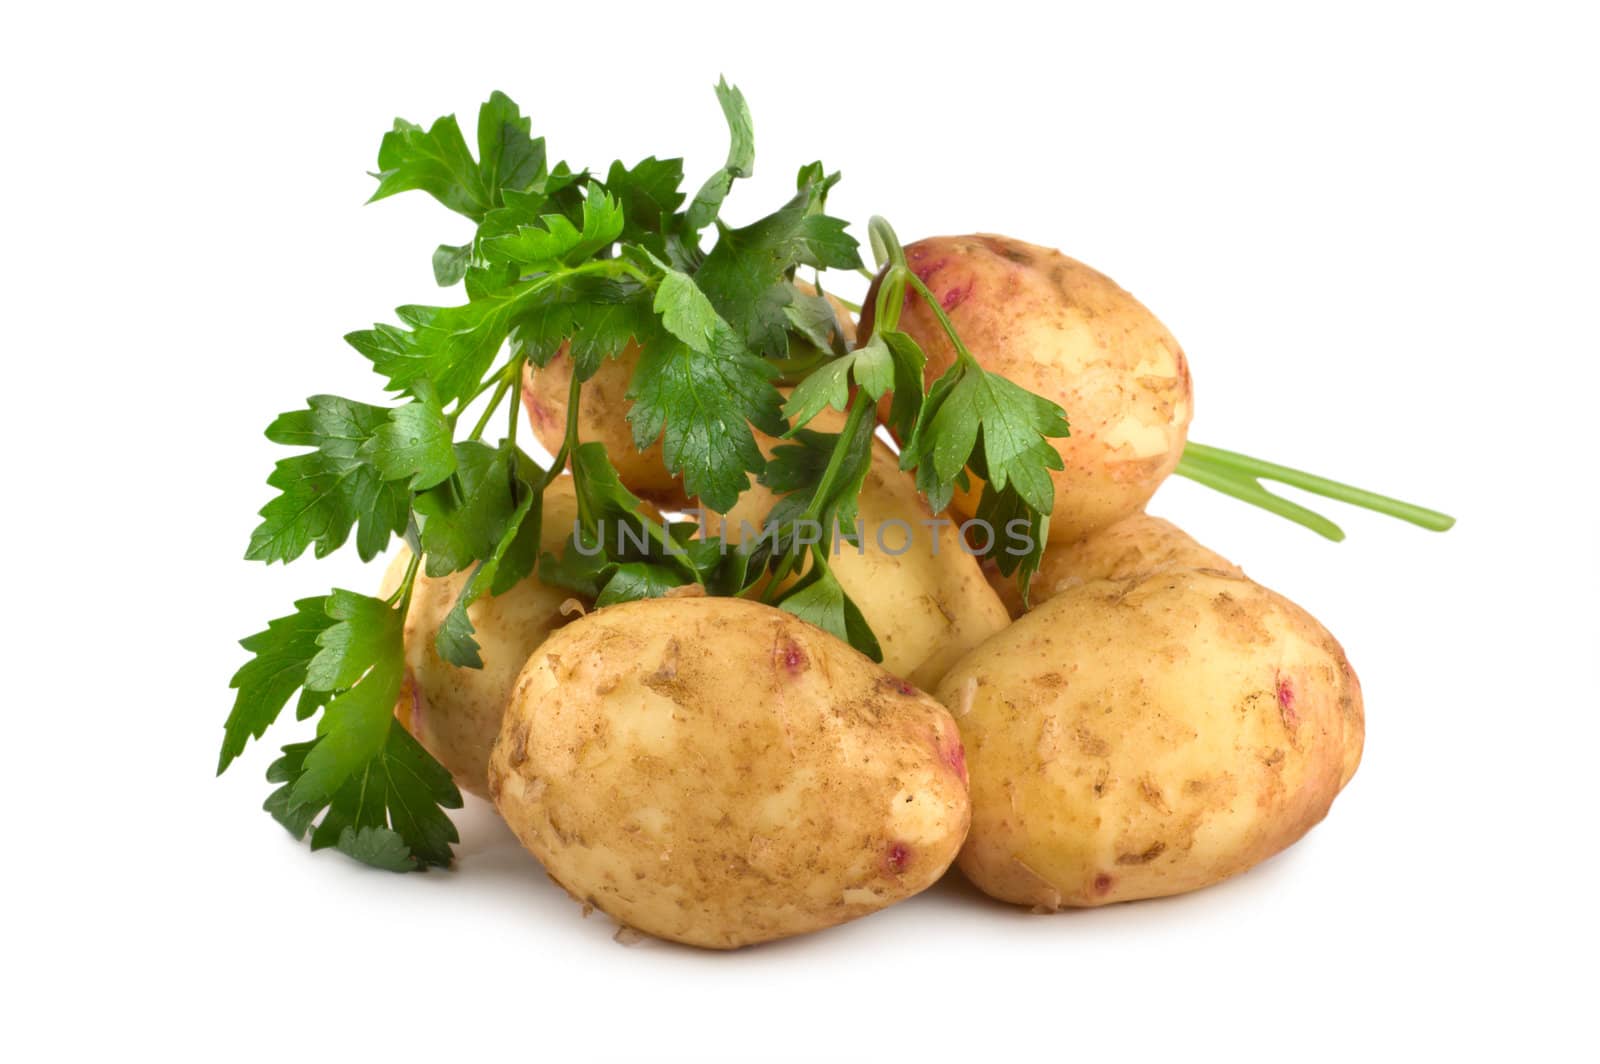 Potato and parsley by Givaga